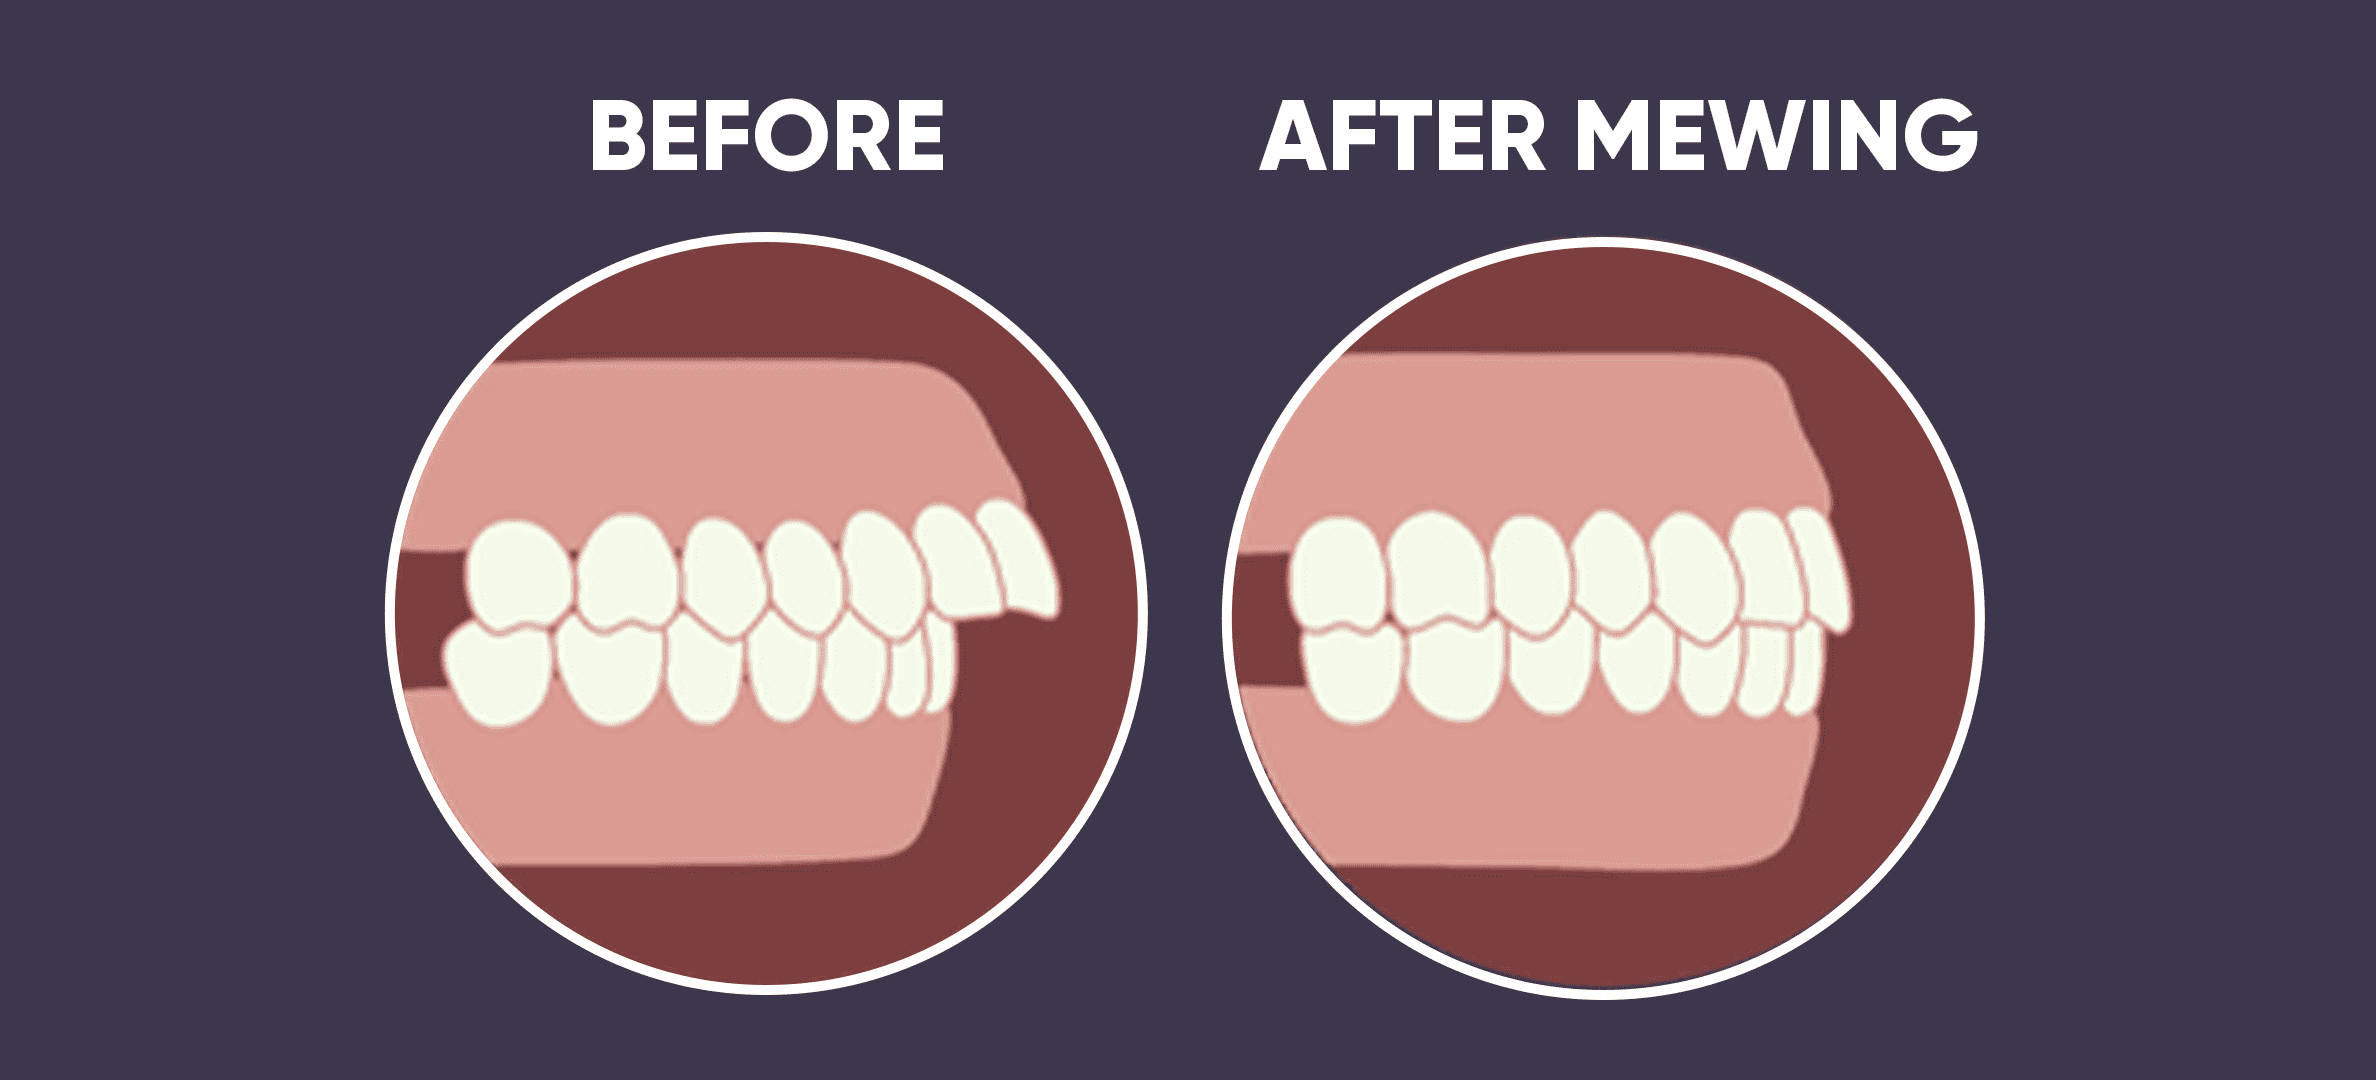 Overbite before and after mewing